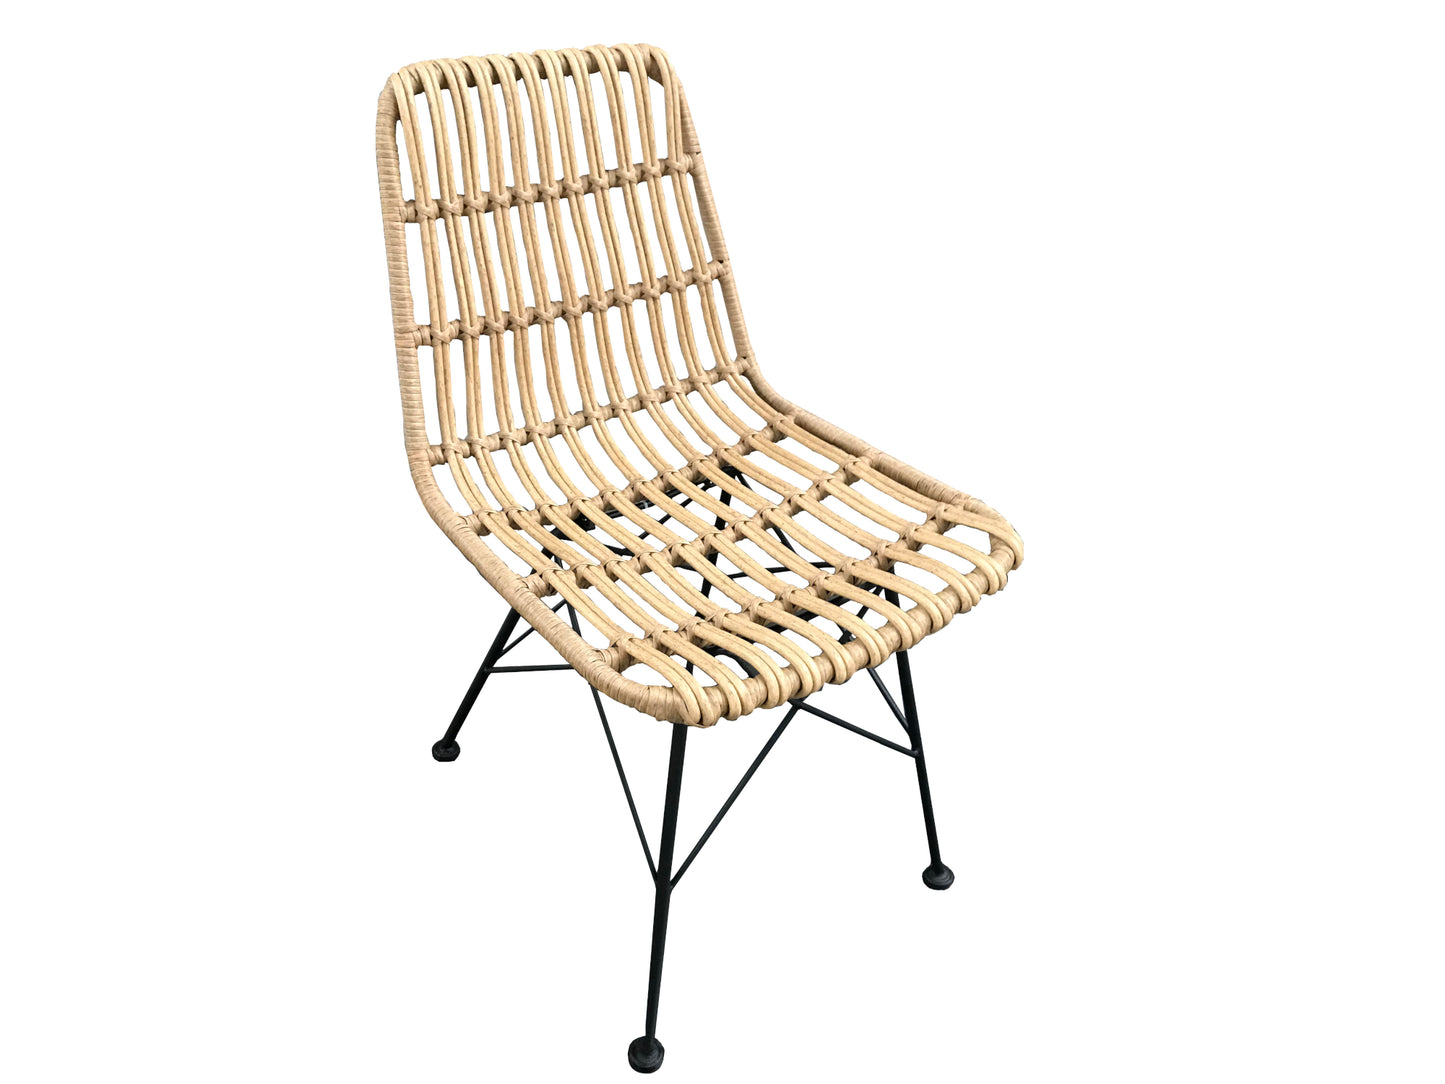 Hadley Rattan Dining Chair (2 Pack)